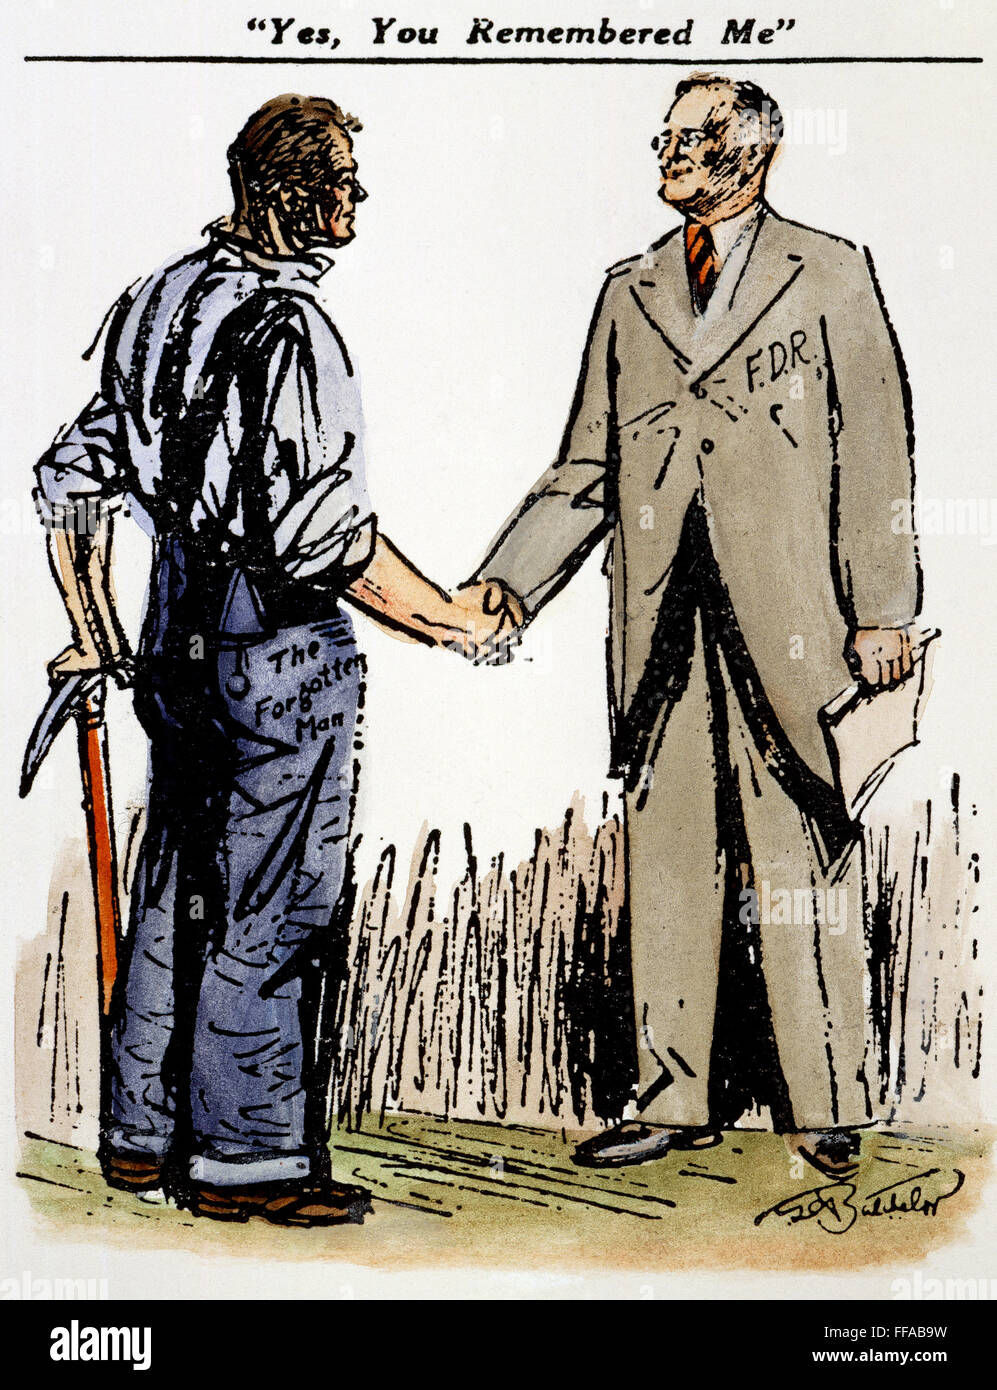 CARTOON: FDR & WORKINGMEN. /n'Yes, You Remembered Me' (The Forgotten Man). Cartoon, 1936, by Clarence D. Batchelor, on President Franklin D. Roosevelt's support among working people in his re-election campaign. Stock Photo